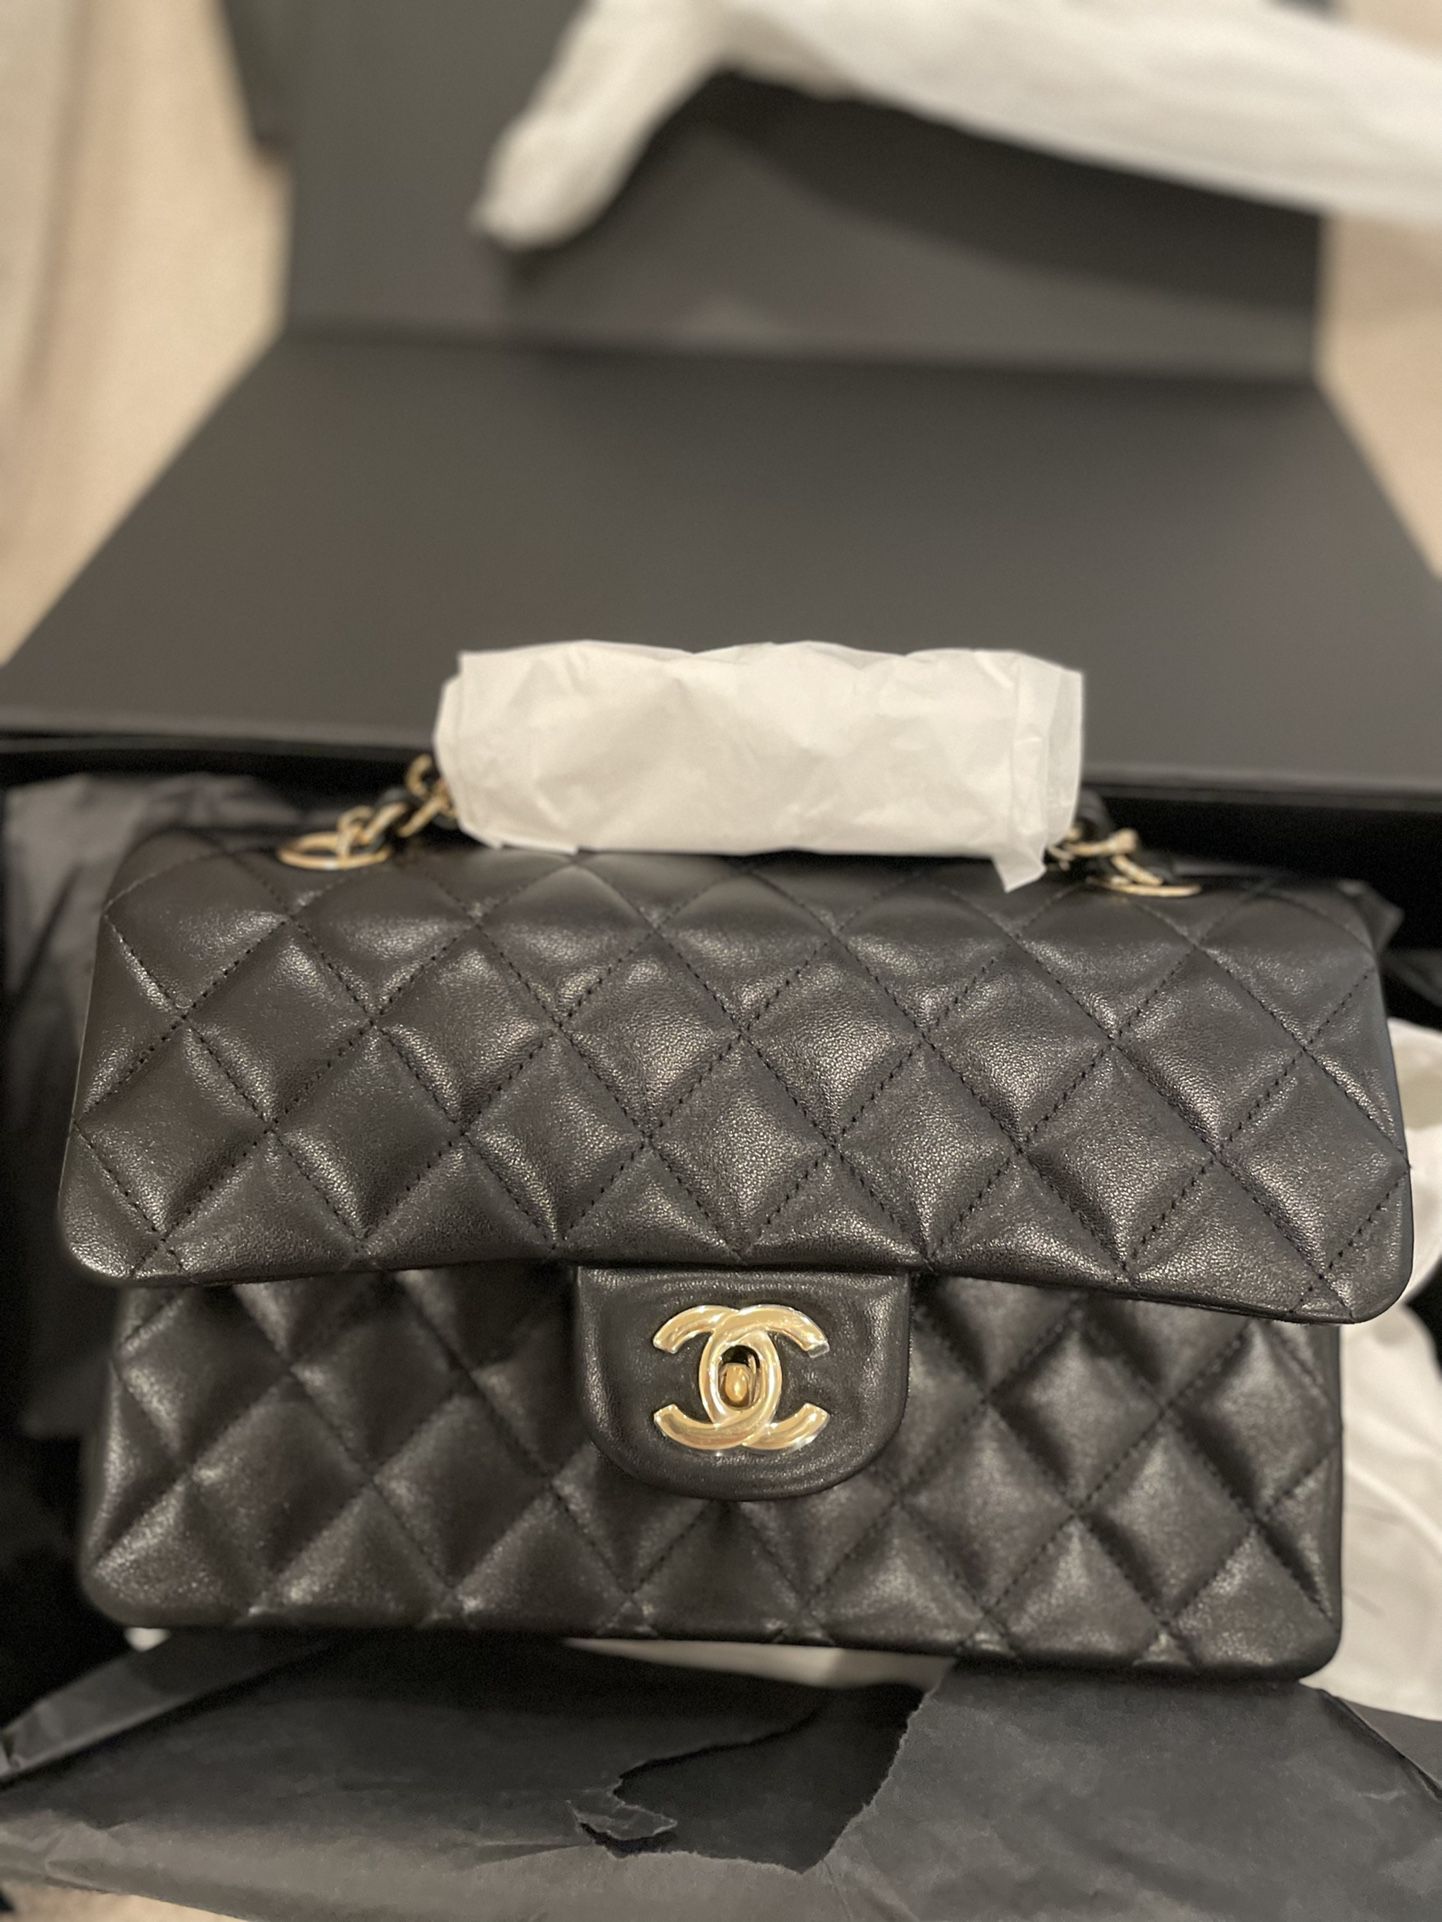 Brand New Chanel Flap Bag. for Sale in San Francisco, CA - OfferUp